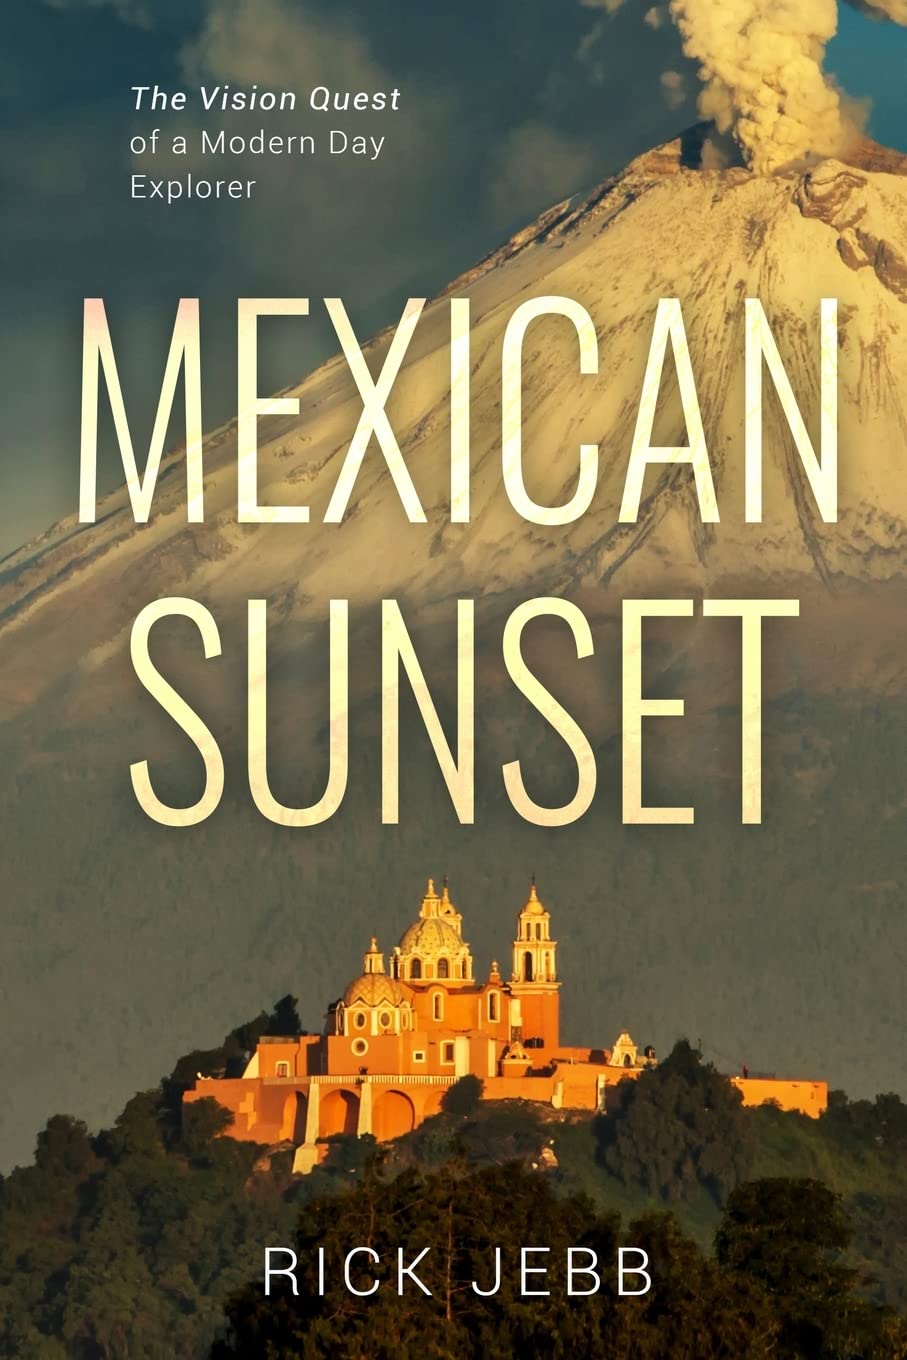 New book "Mexican Sunset" by Rick Jebb is released, a spiritual memoir of self-discovery, love, travel, and finding purpose in the cultural turmoil of the 1970s